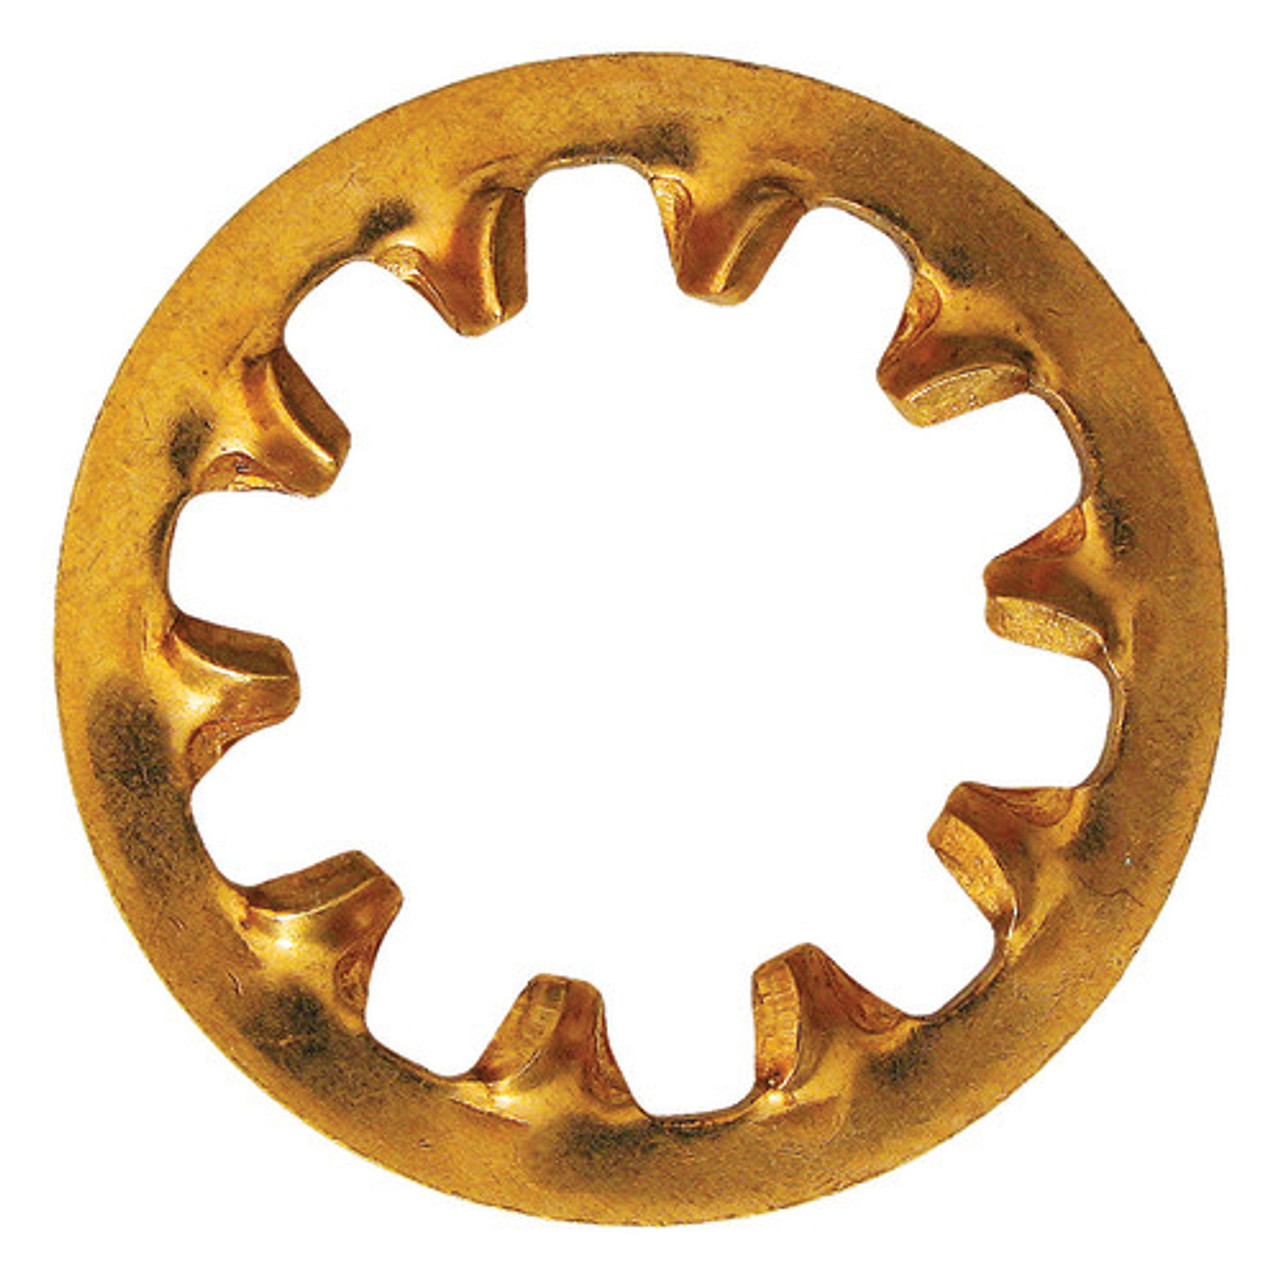 1/4" Silicon Bronze Internal Tooth Lock Washer 100 Pc.   5462-214